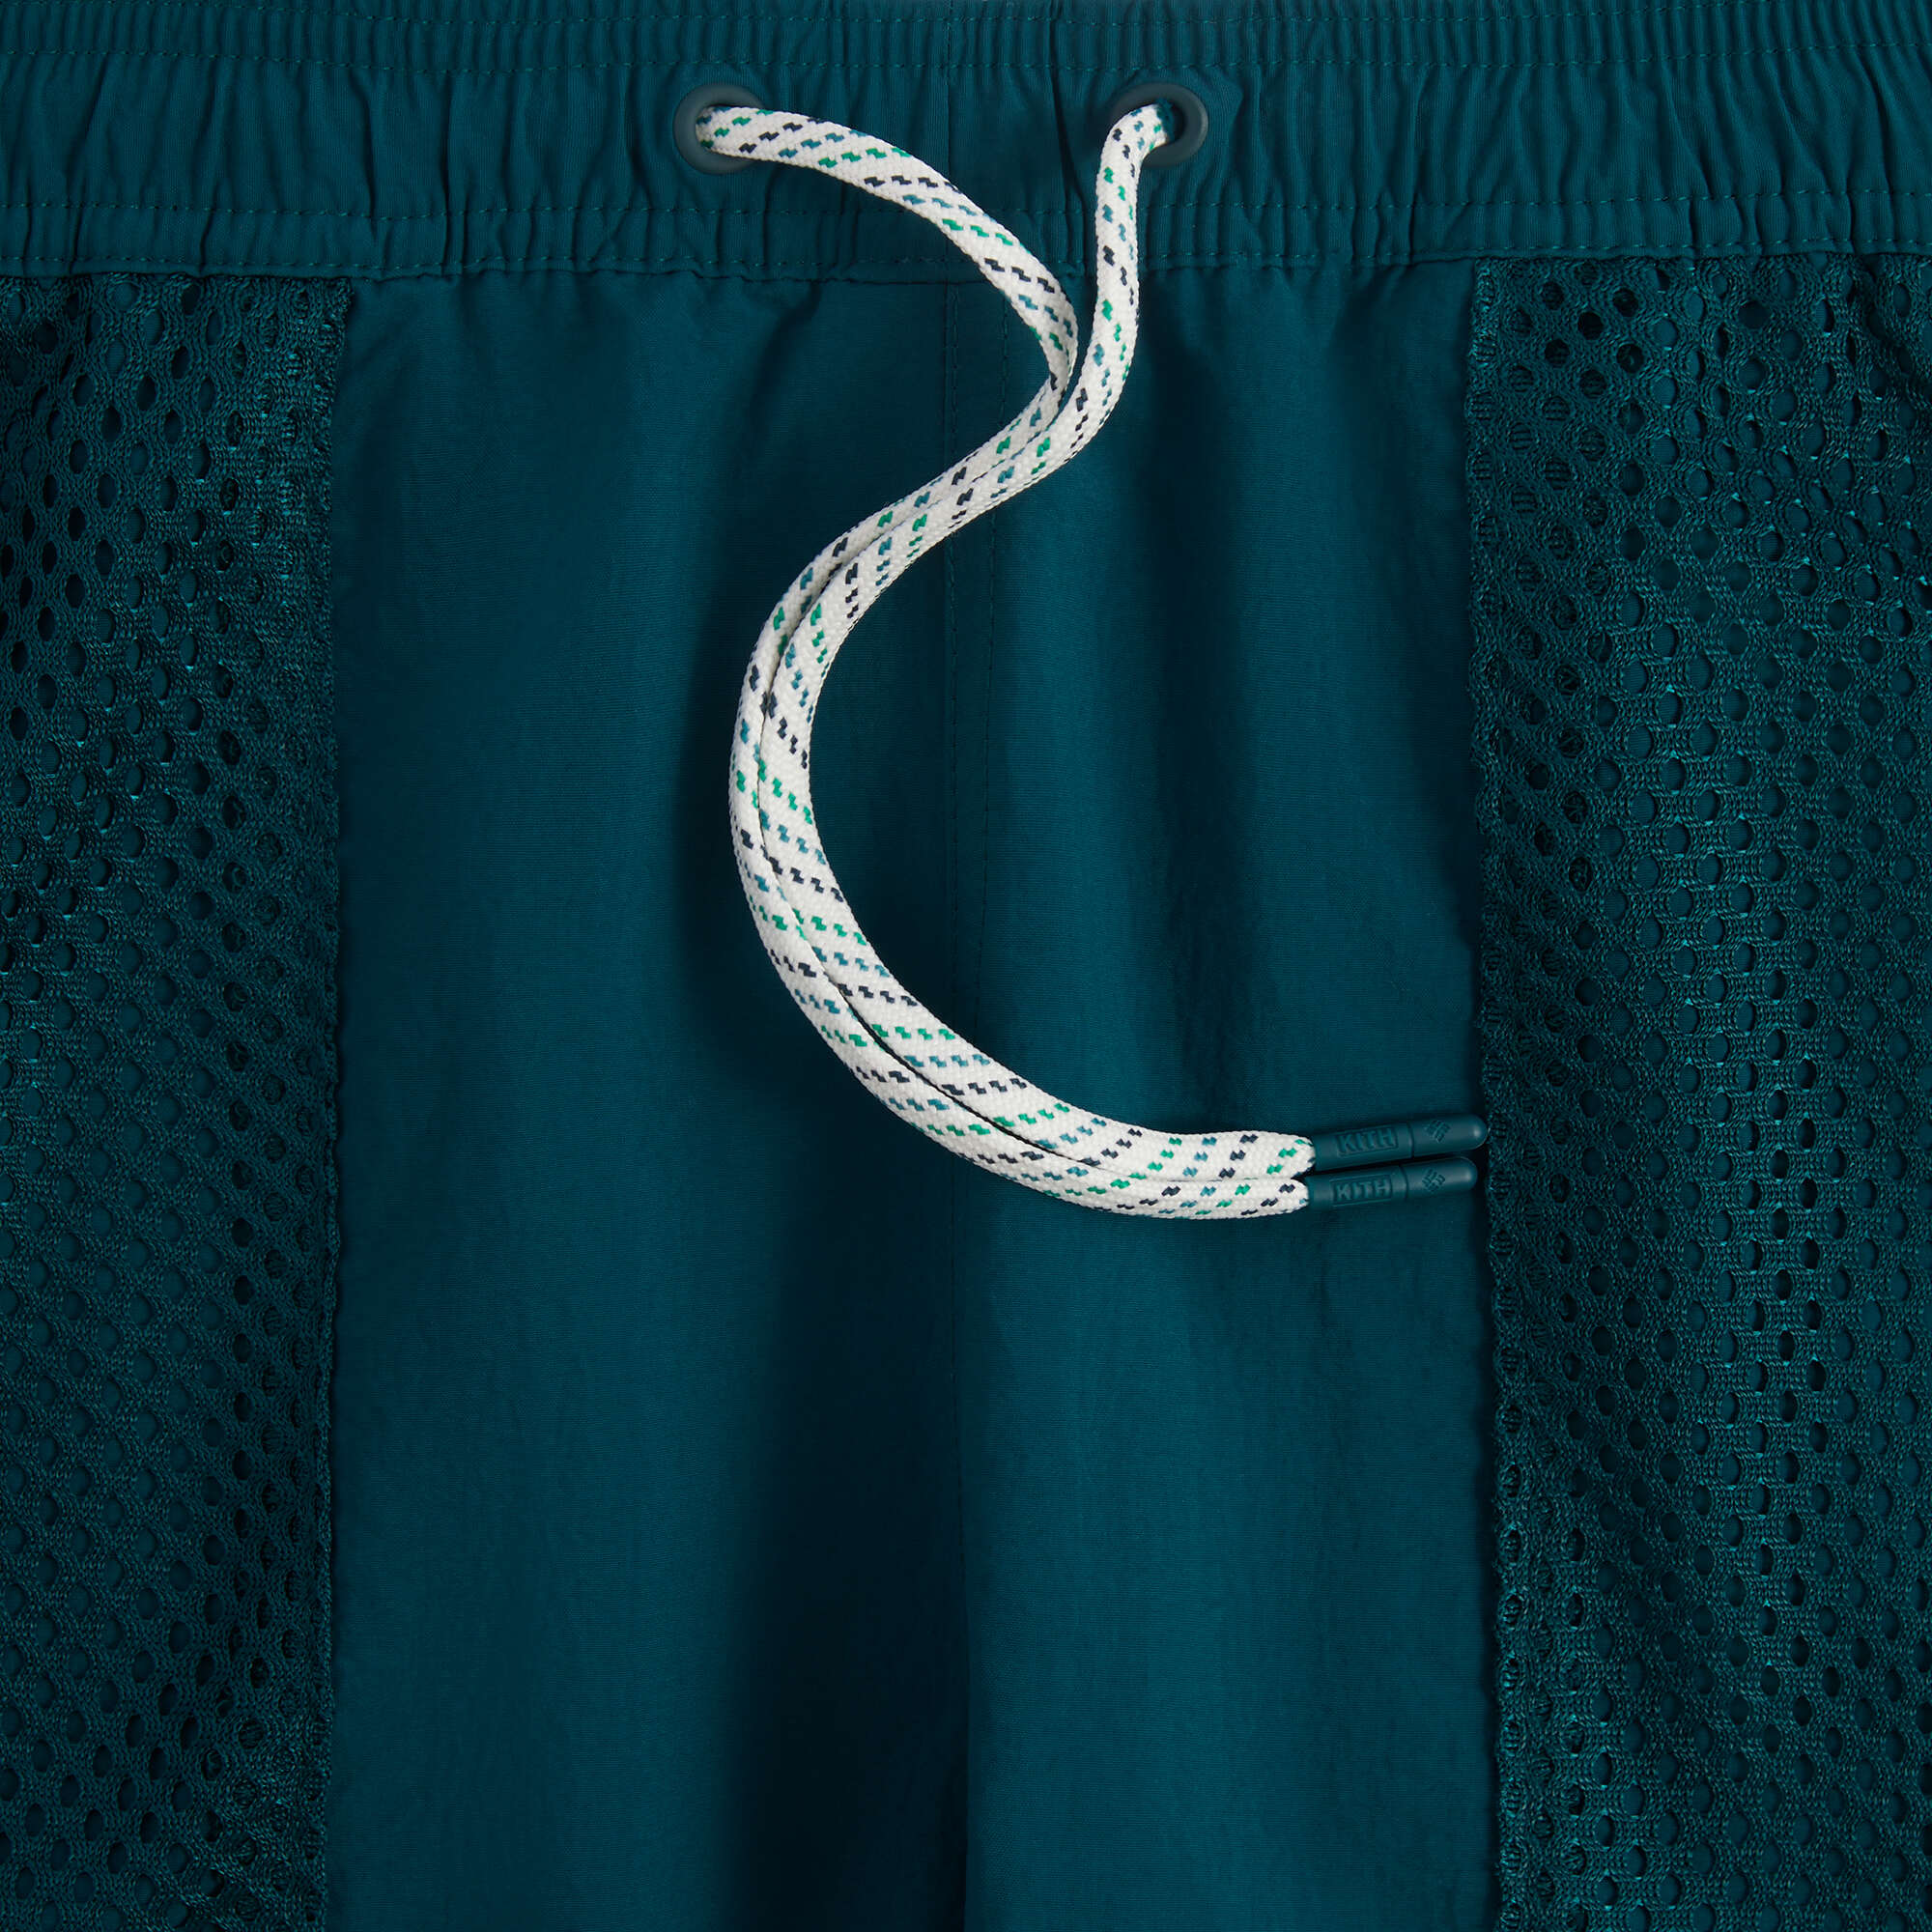 Kith for Columbia Wind Short - Midnight Teal